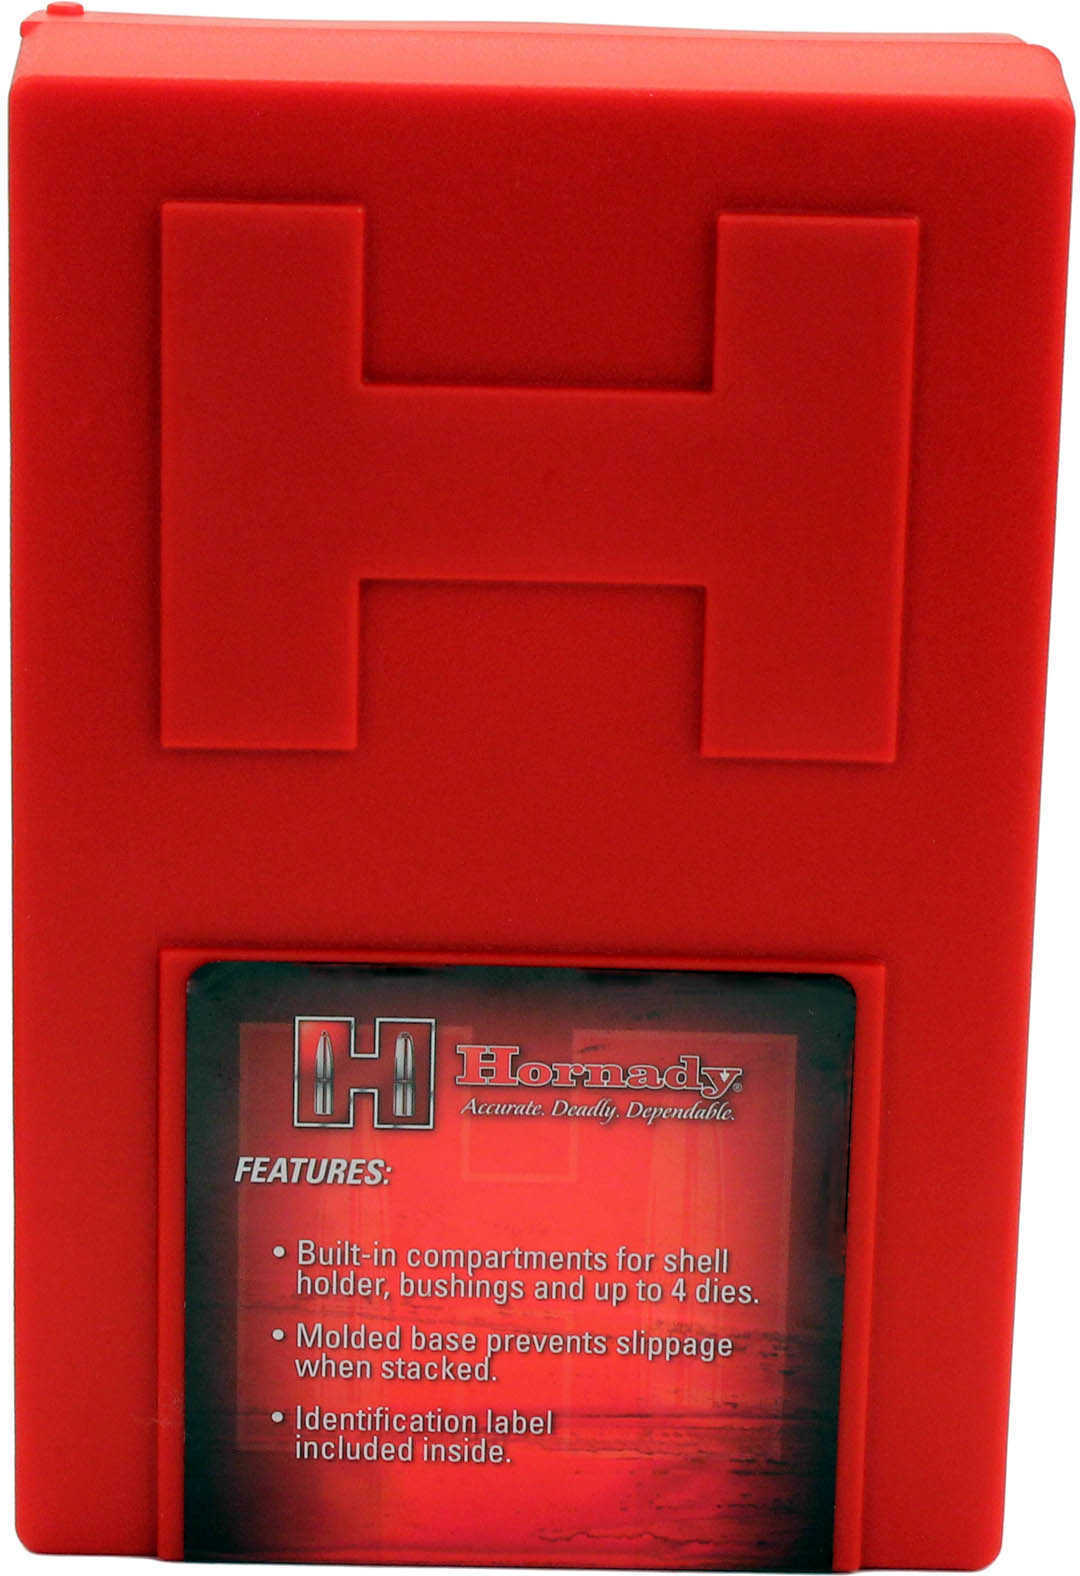 Hornady Large Die Box Note: Box Only